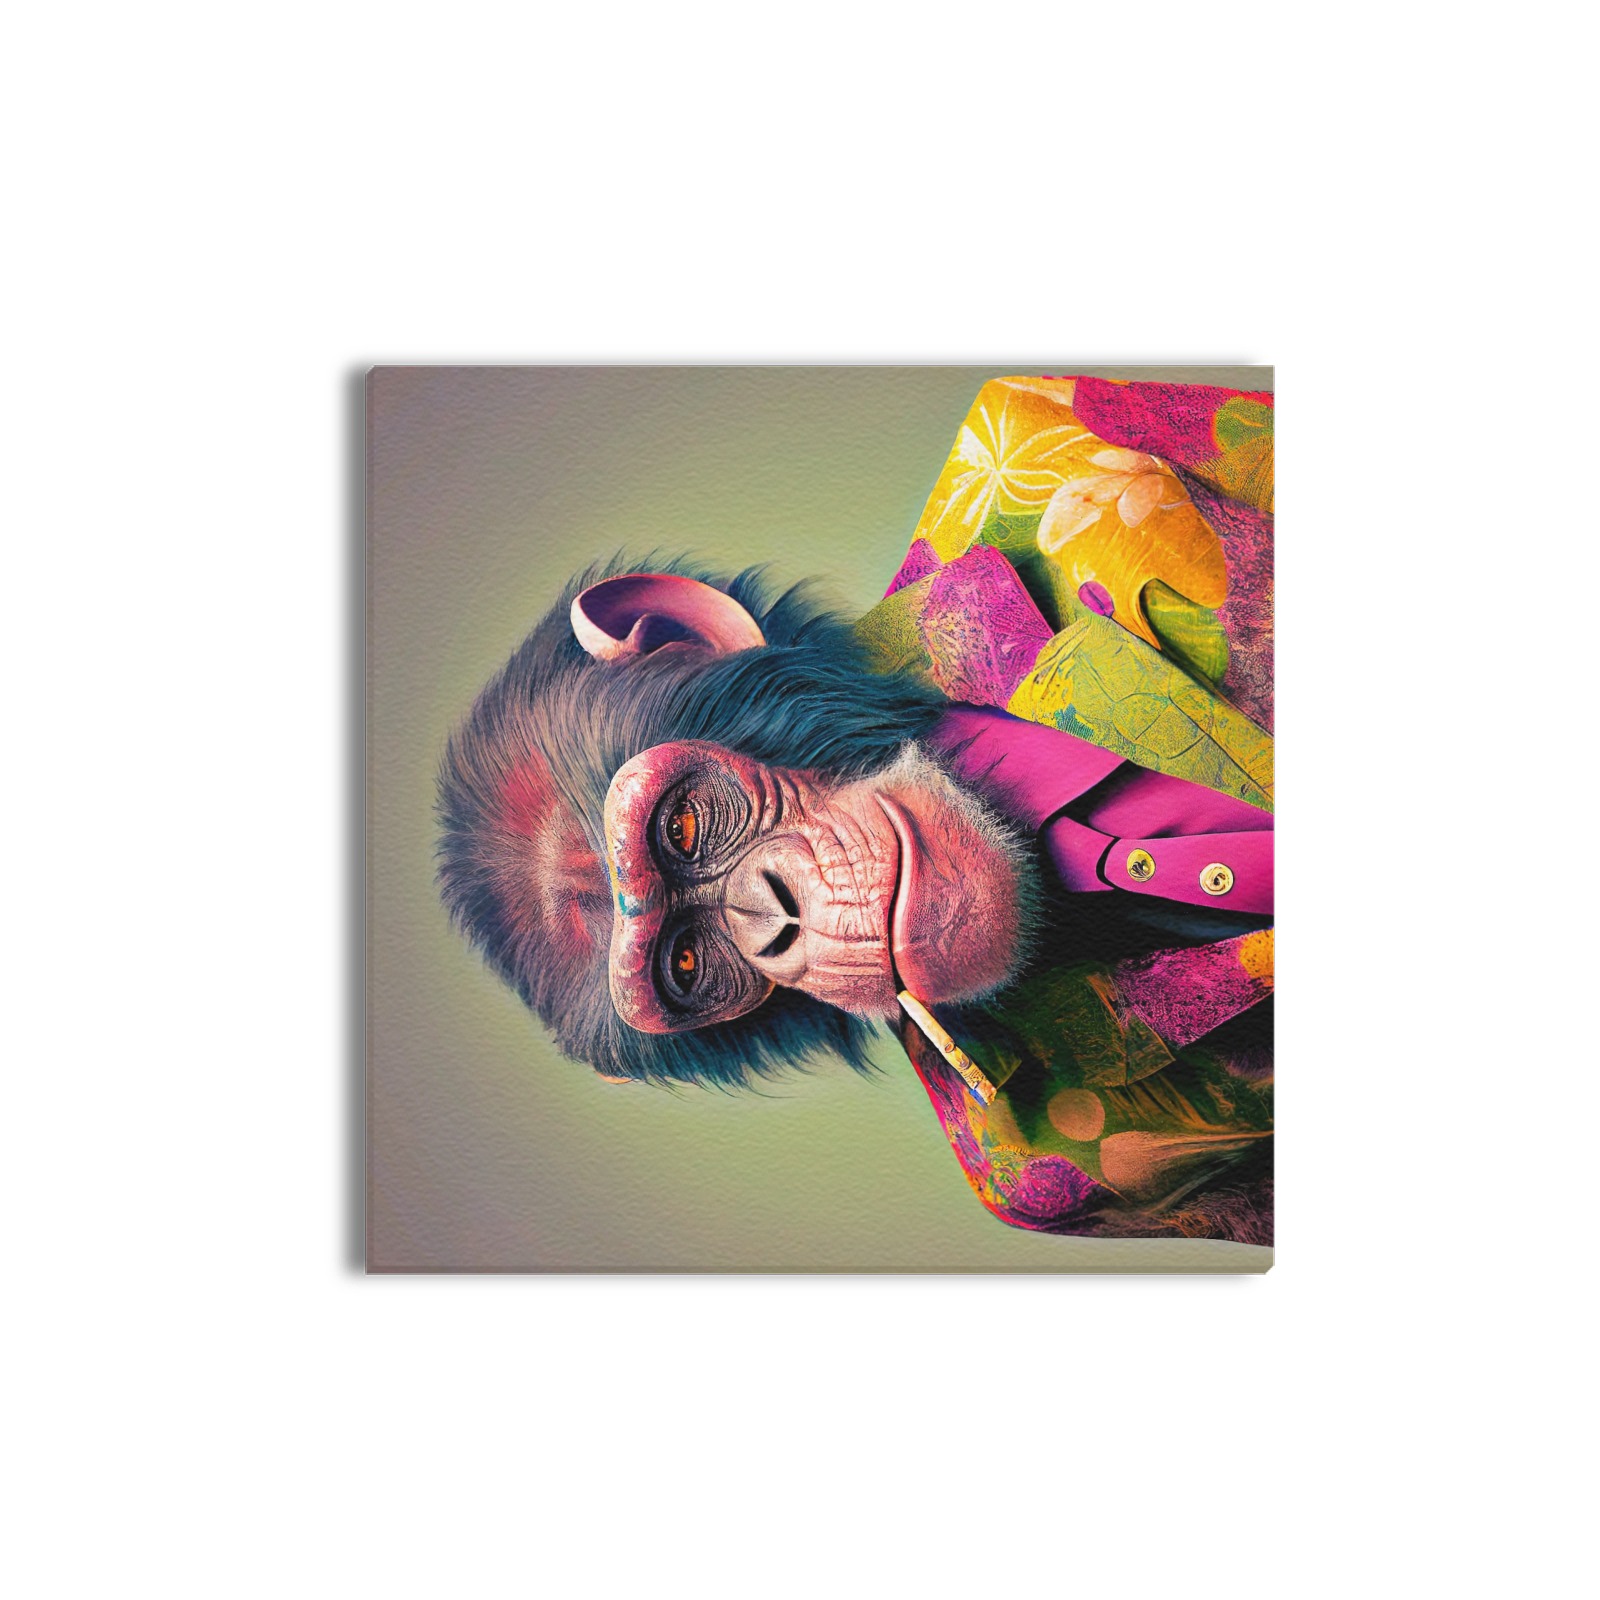 baked chimp 1/4 Upgraded Canvas Print 16"x16"